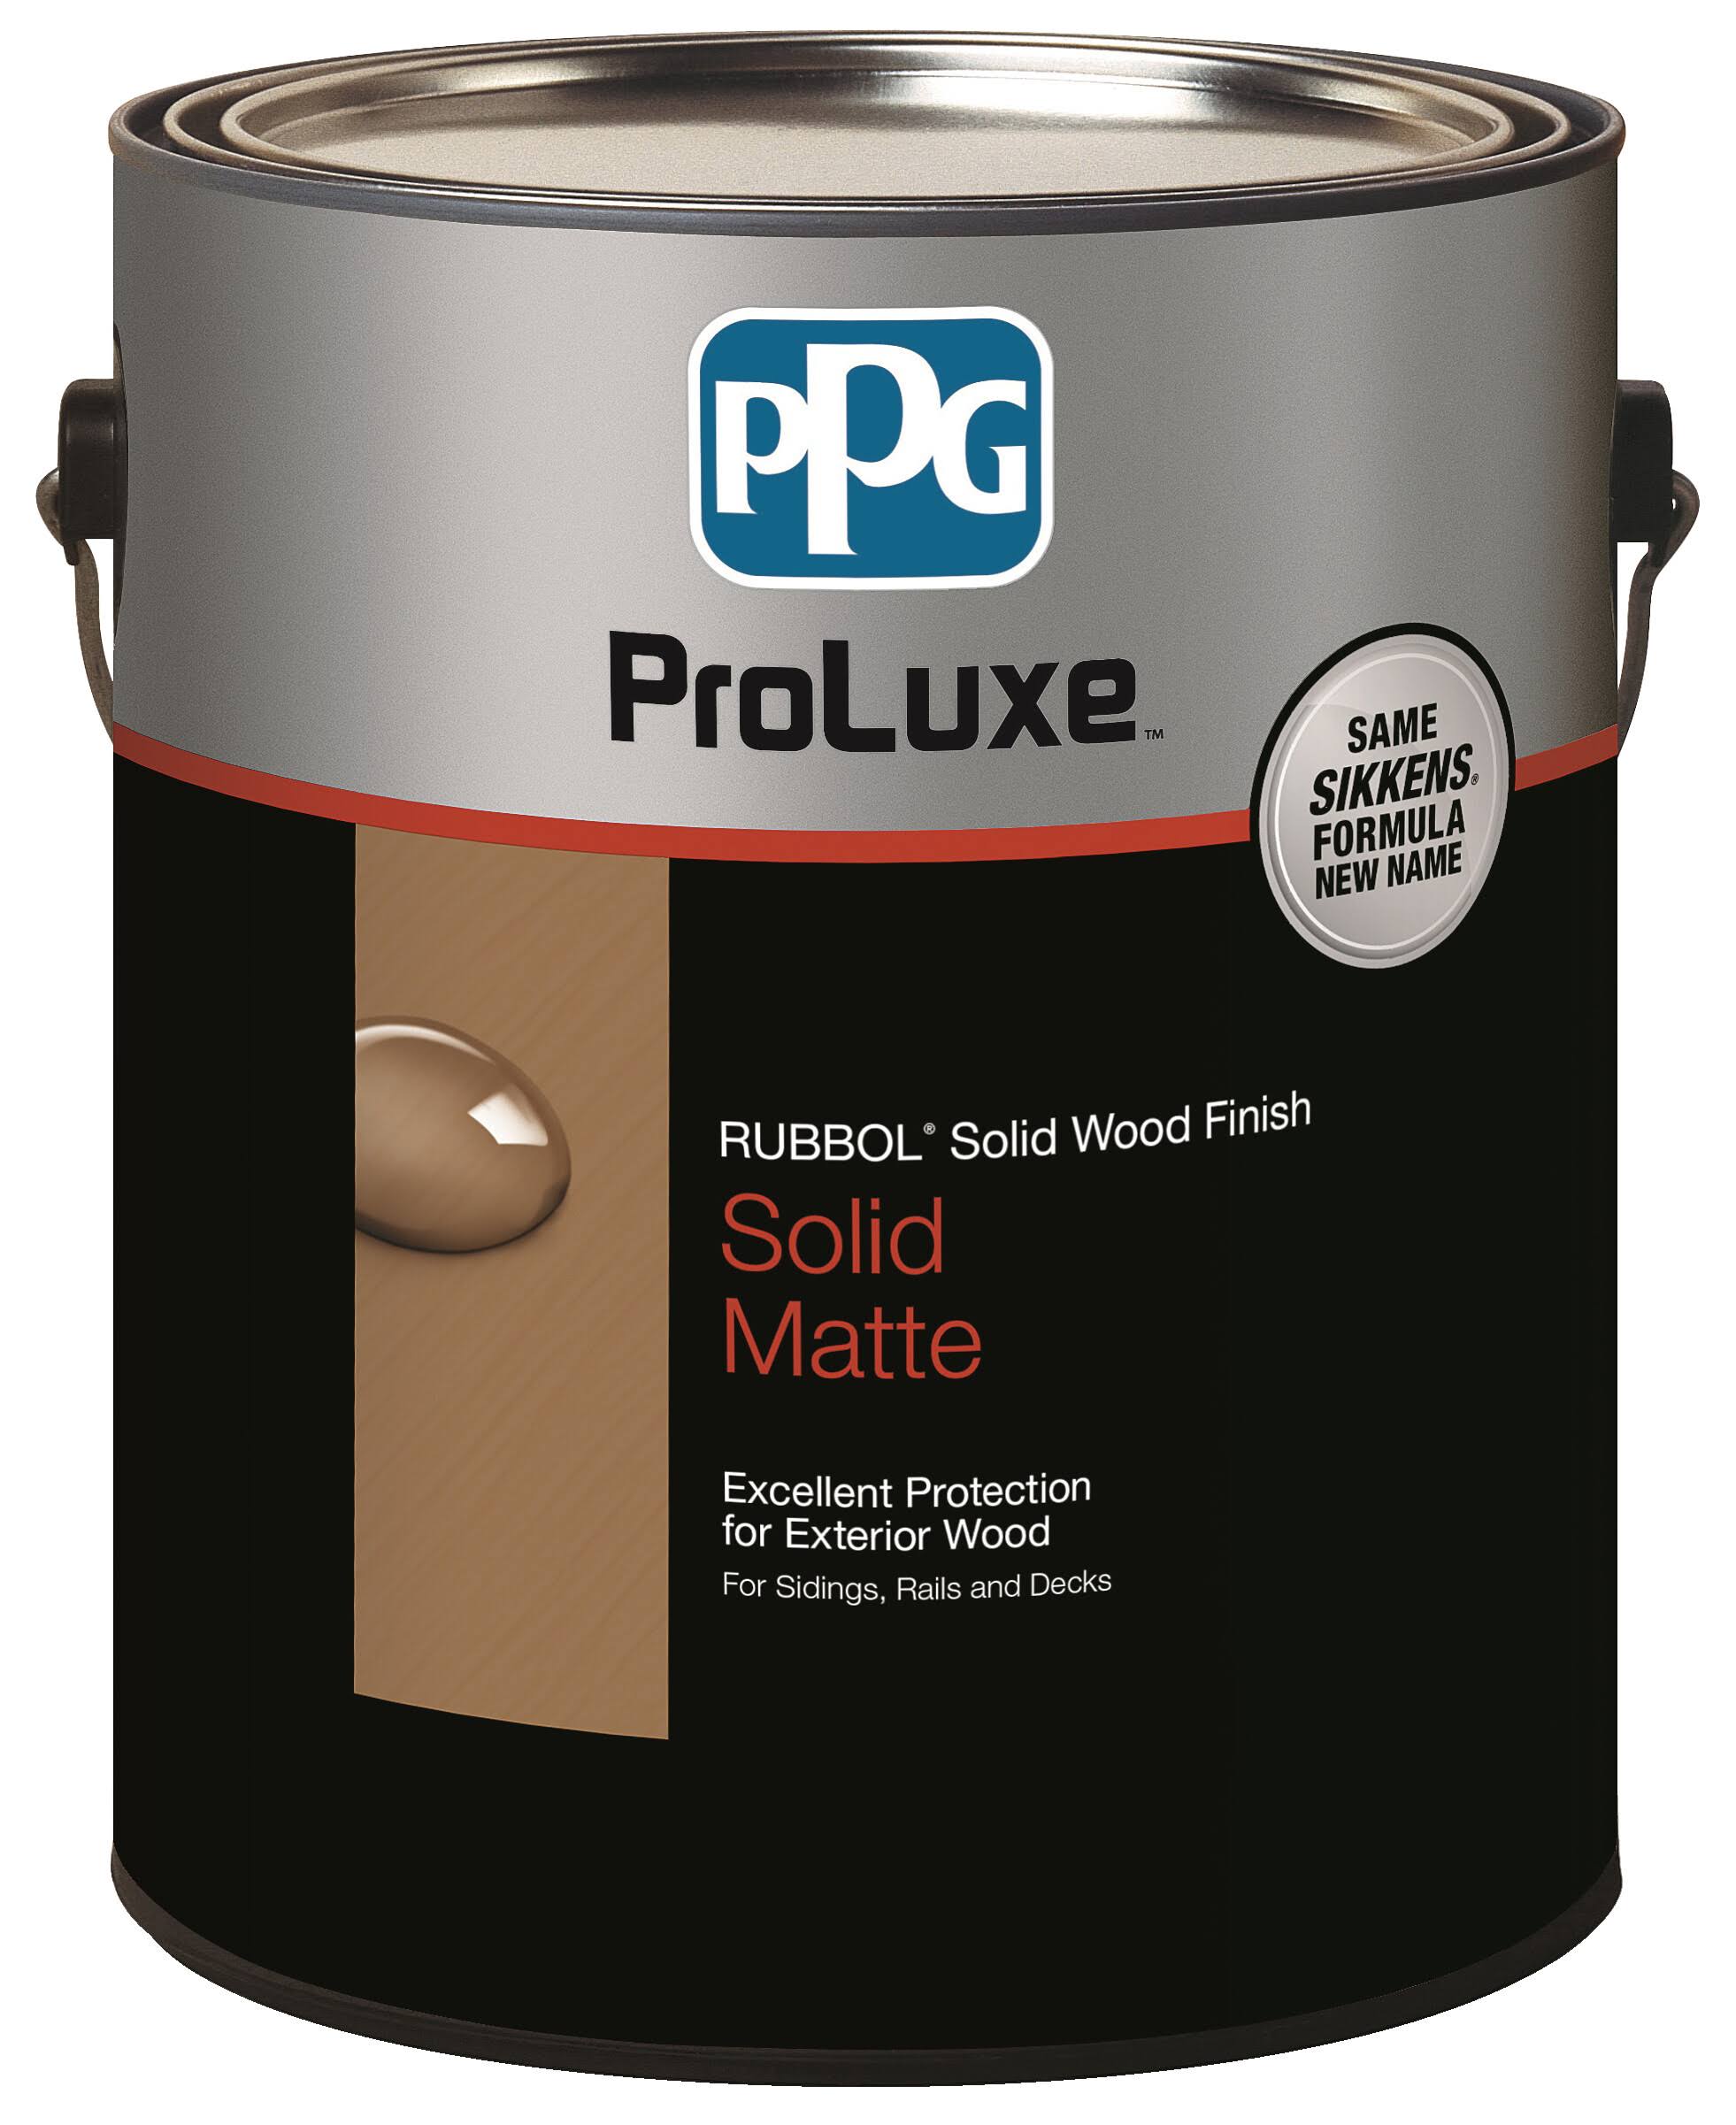 PPG Proluxe Rubbol SIK710-110/01 Solid Wood Finish, Light Base, Low-Luster, 1 Gal